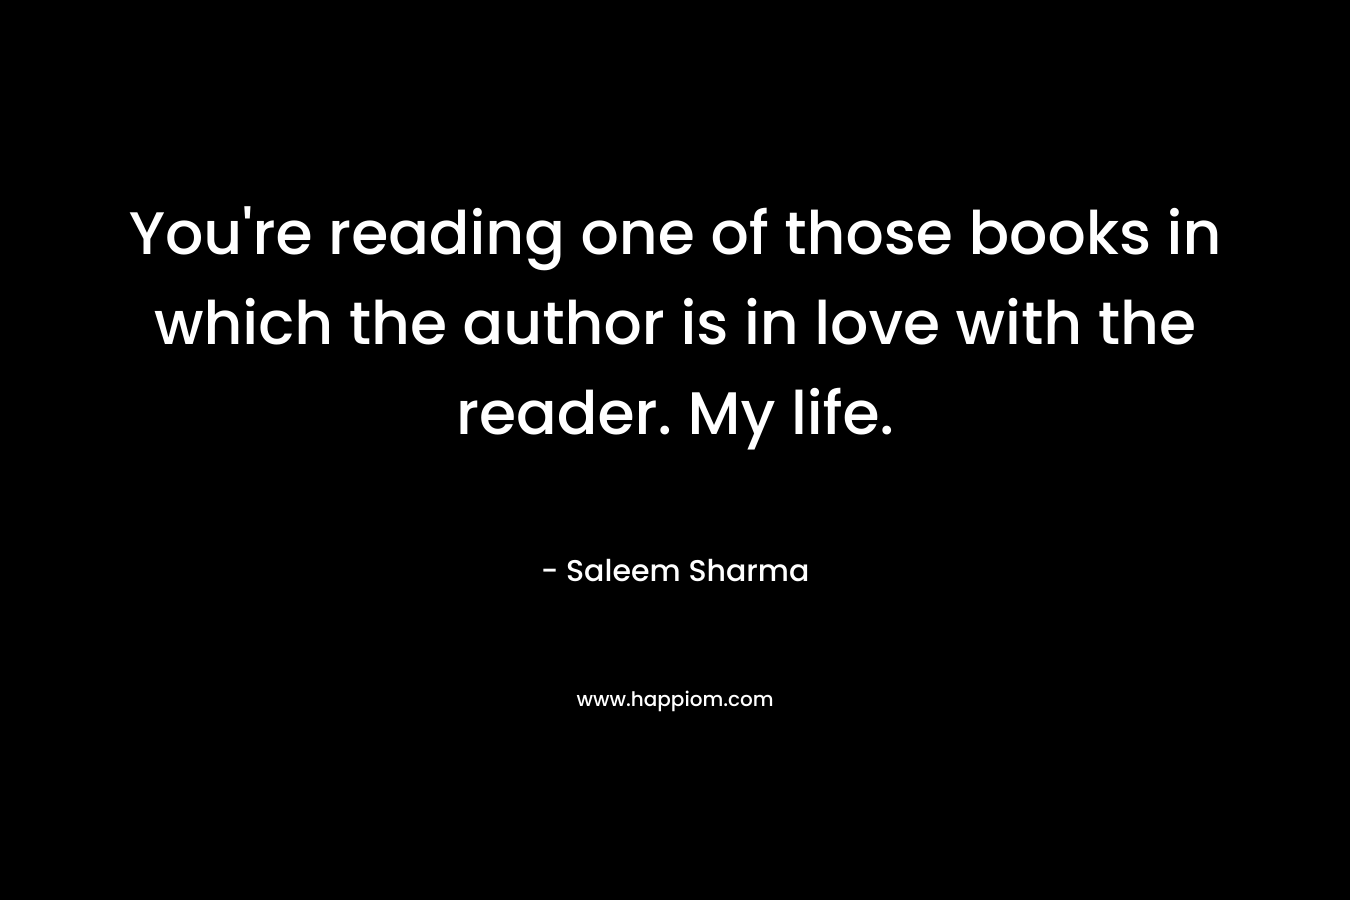 You're reading one of those books in which the author is in love with the reader. My life.